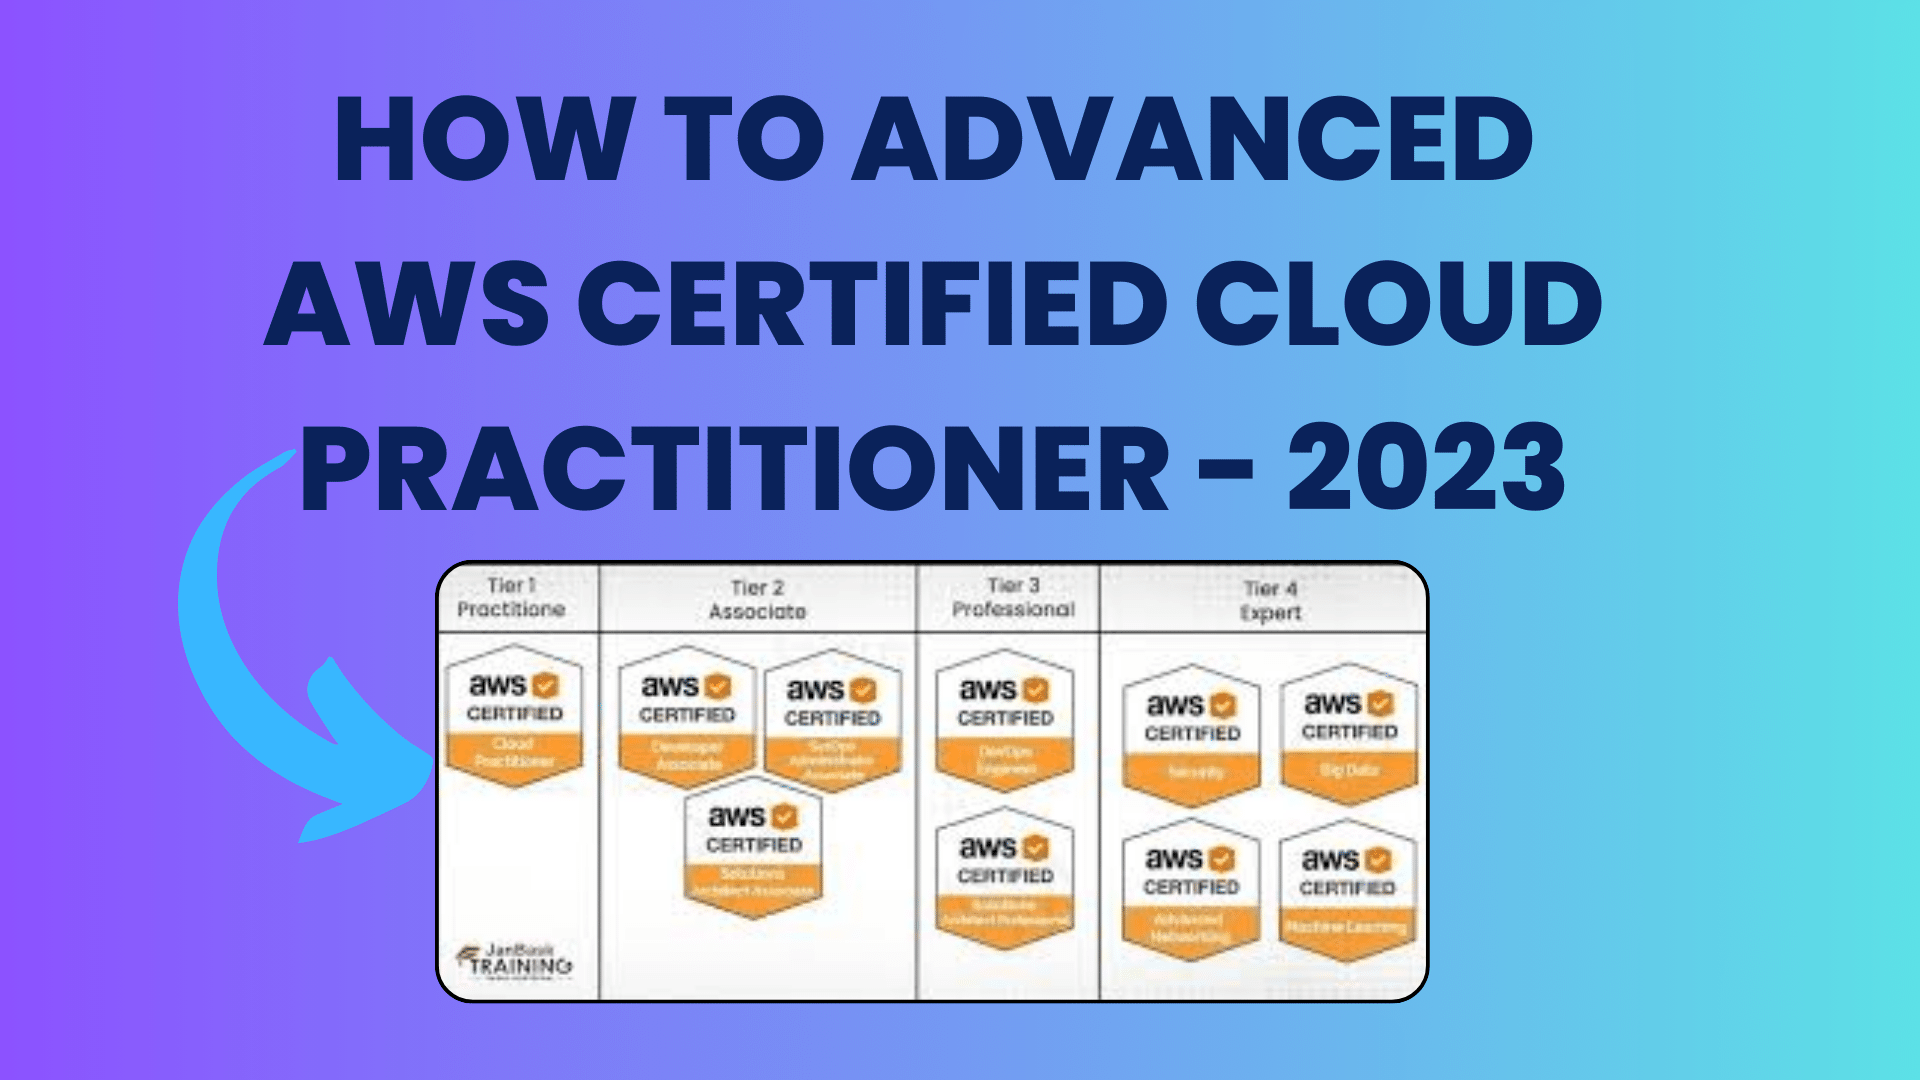 How To Advanced AWS Certified Cloud Practitioner - 2023